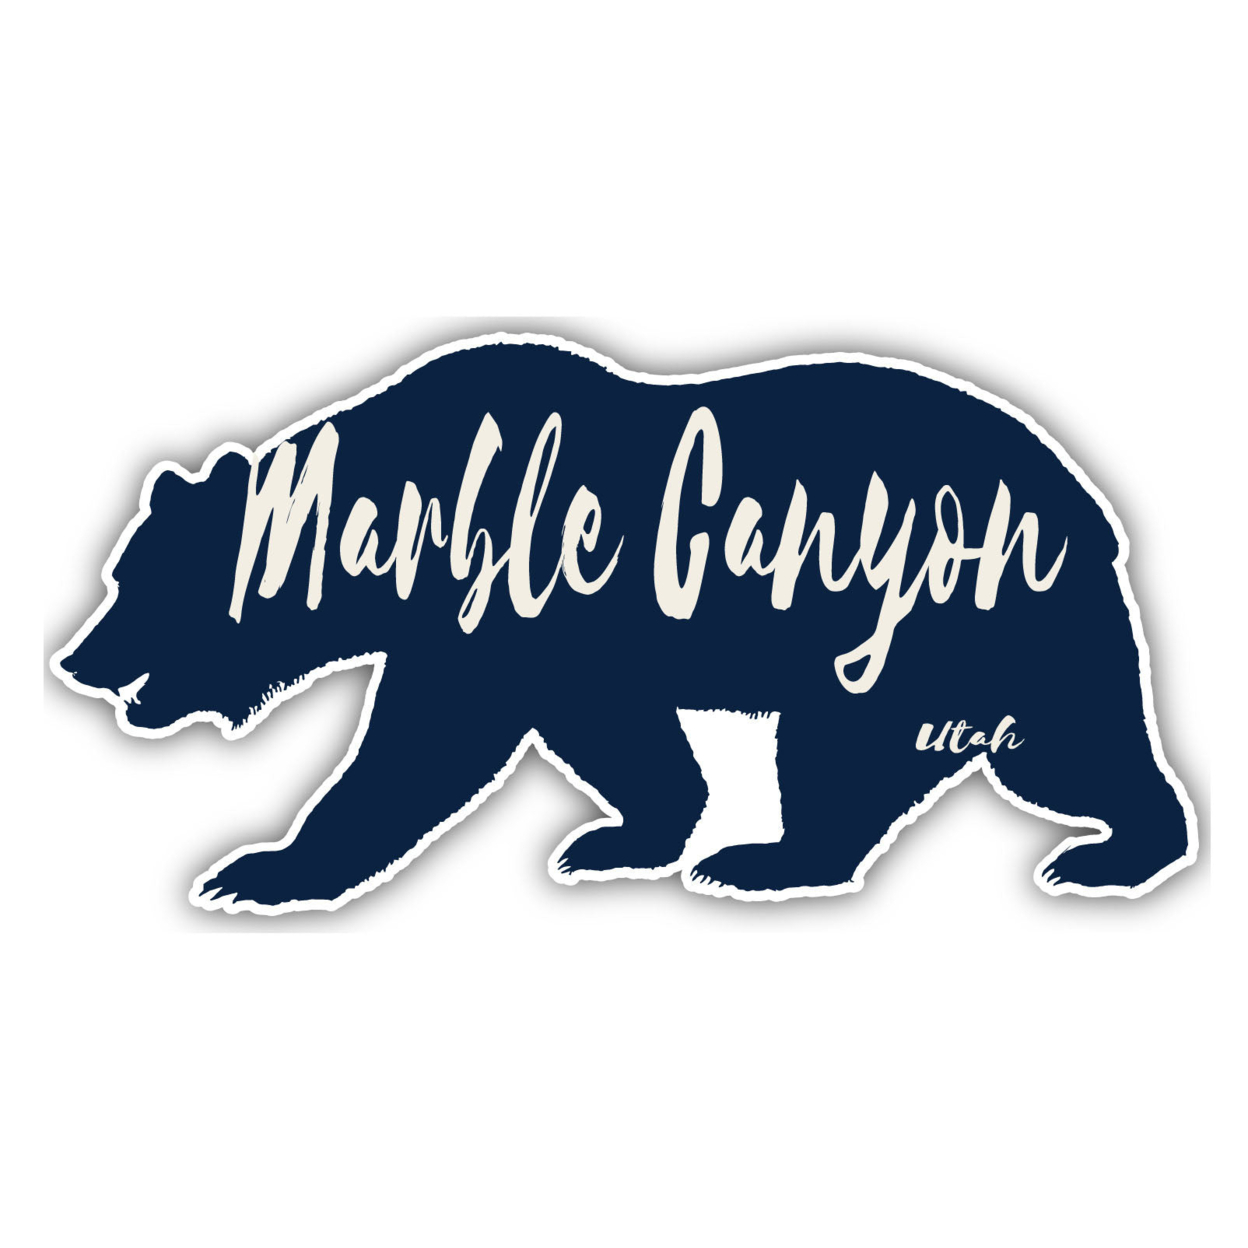 Marble Canyon Utah Souvenir Decorative Stickers (Choose Theme And Size) - 2-Inch, Bear